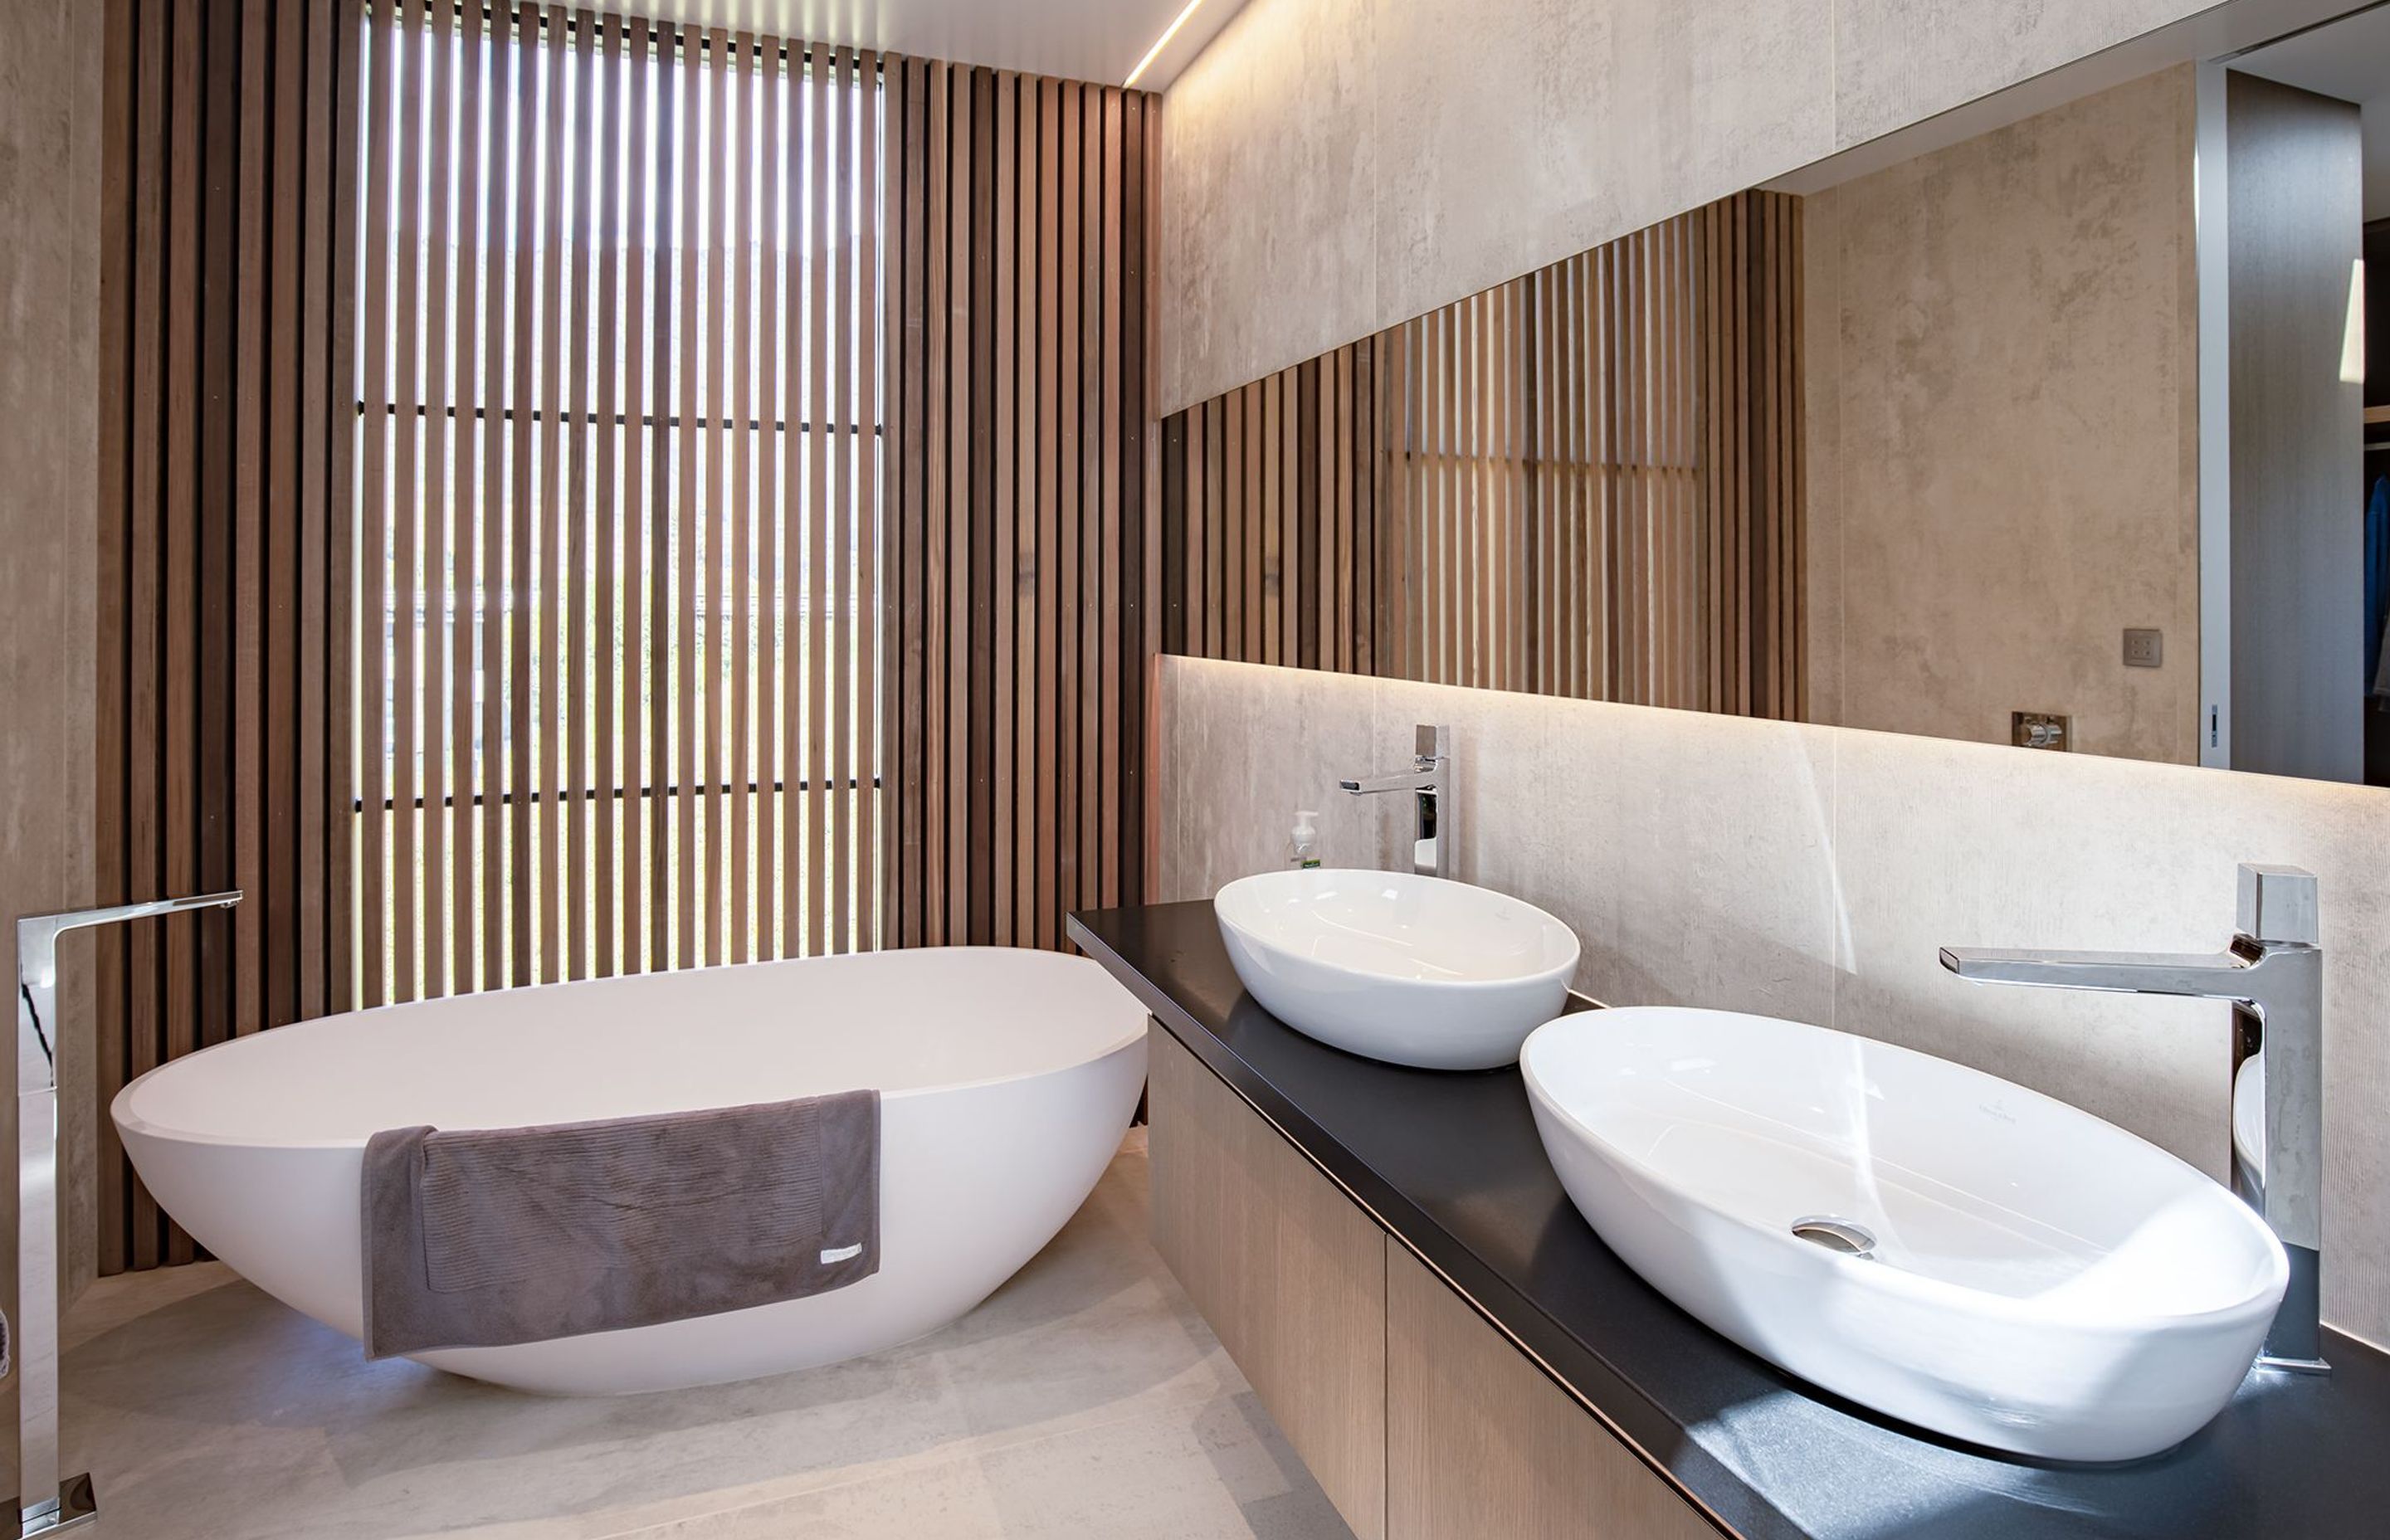 A curvaceous bath and sinks add another dimension to the sharp lines of the large-format tiling and the cedar screen.